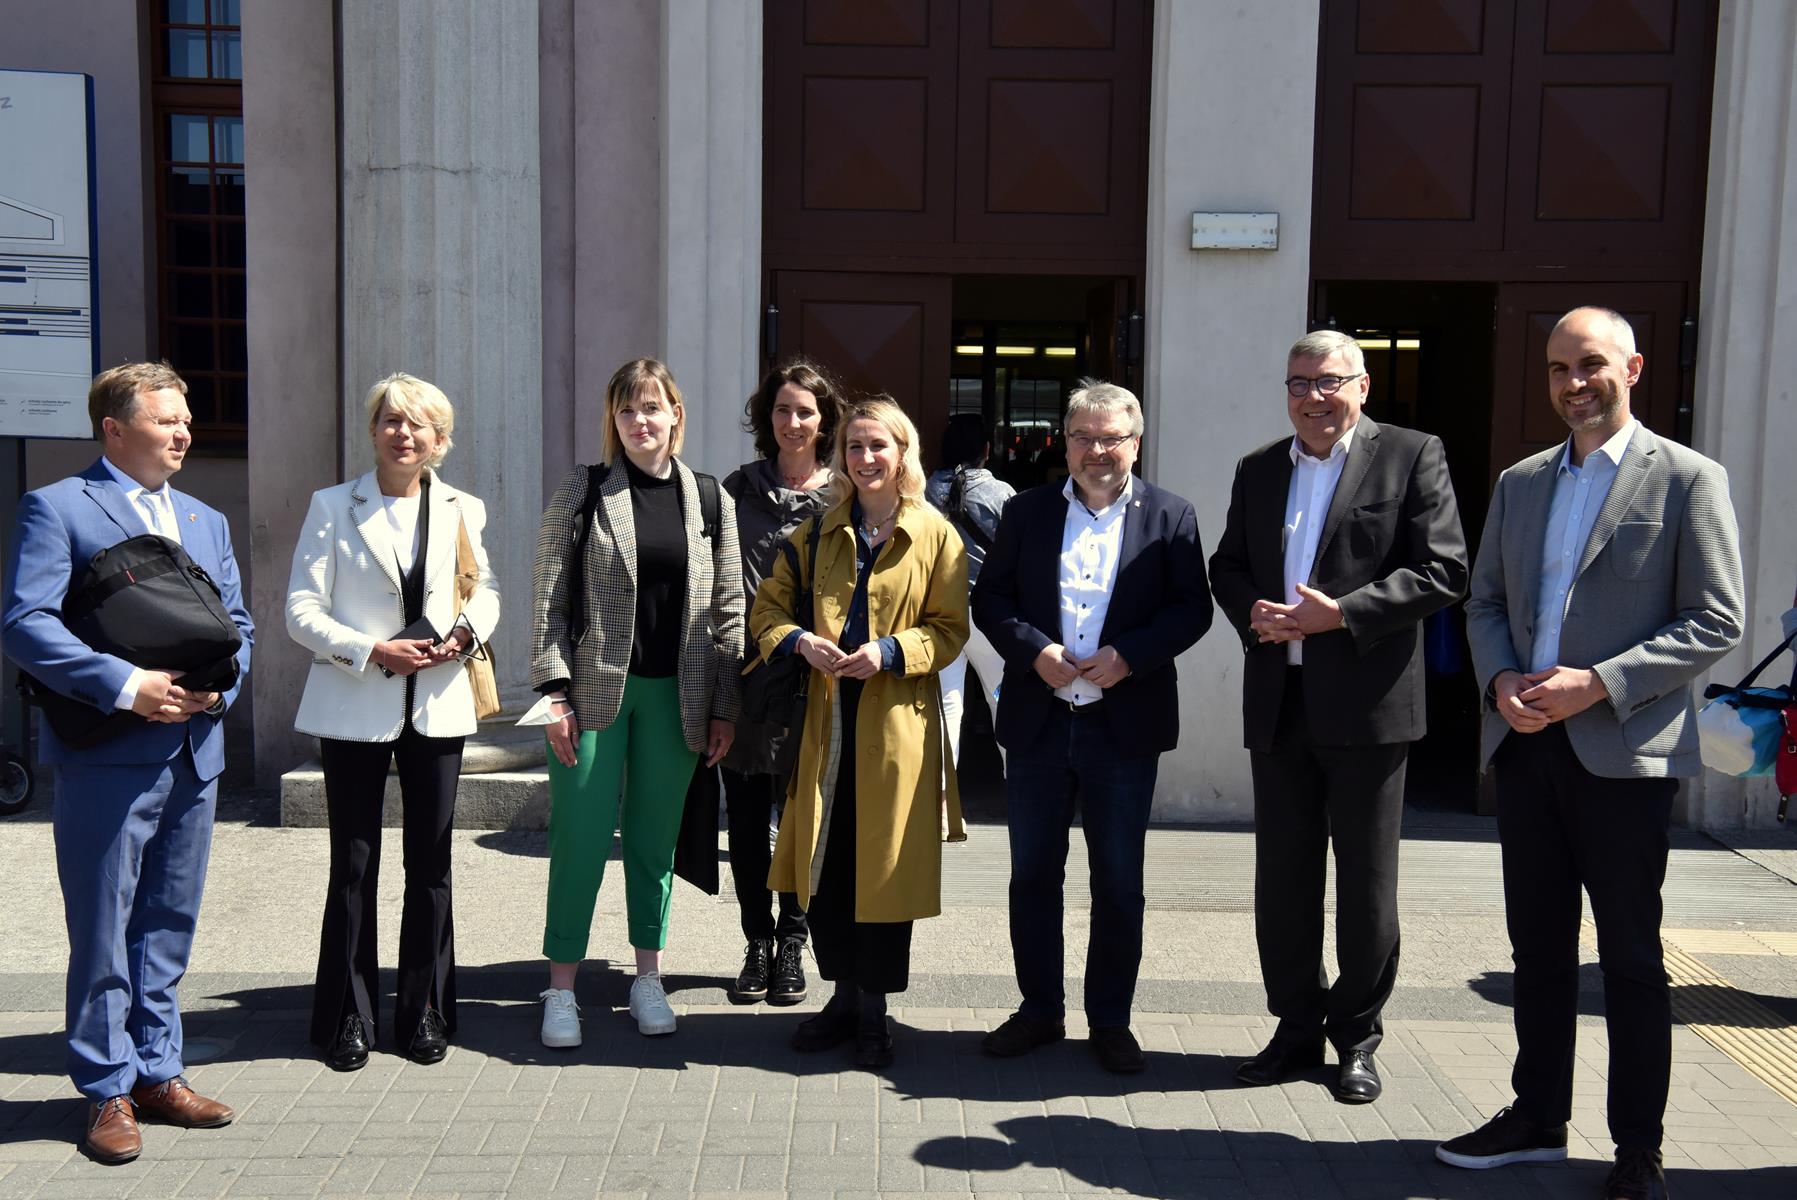 The photo shows the delegation - a group of people standing side by side, with the train station building behind them - grafika artykułu